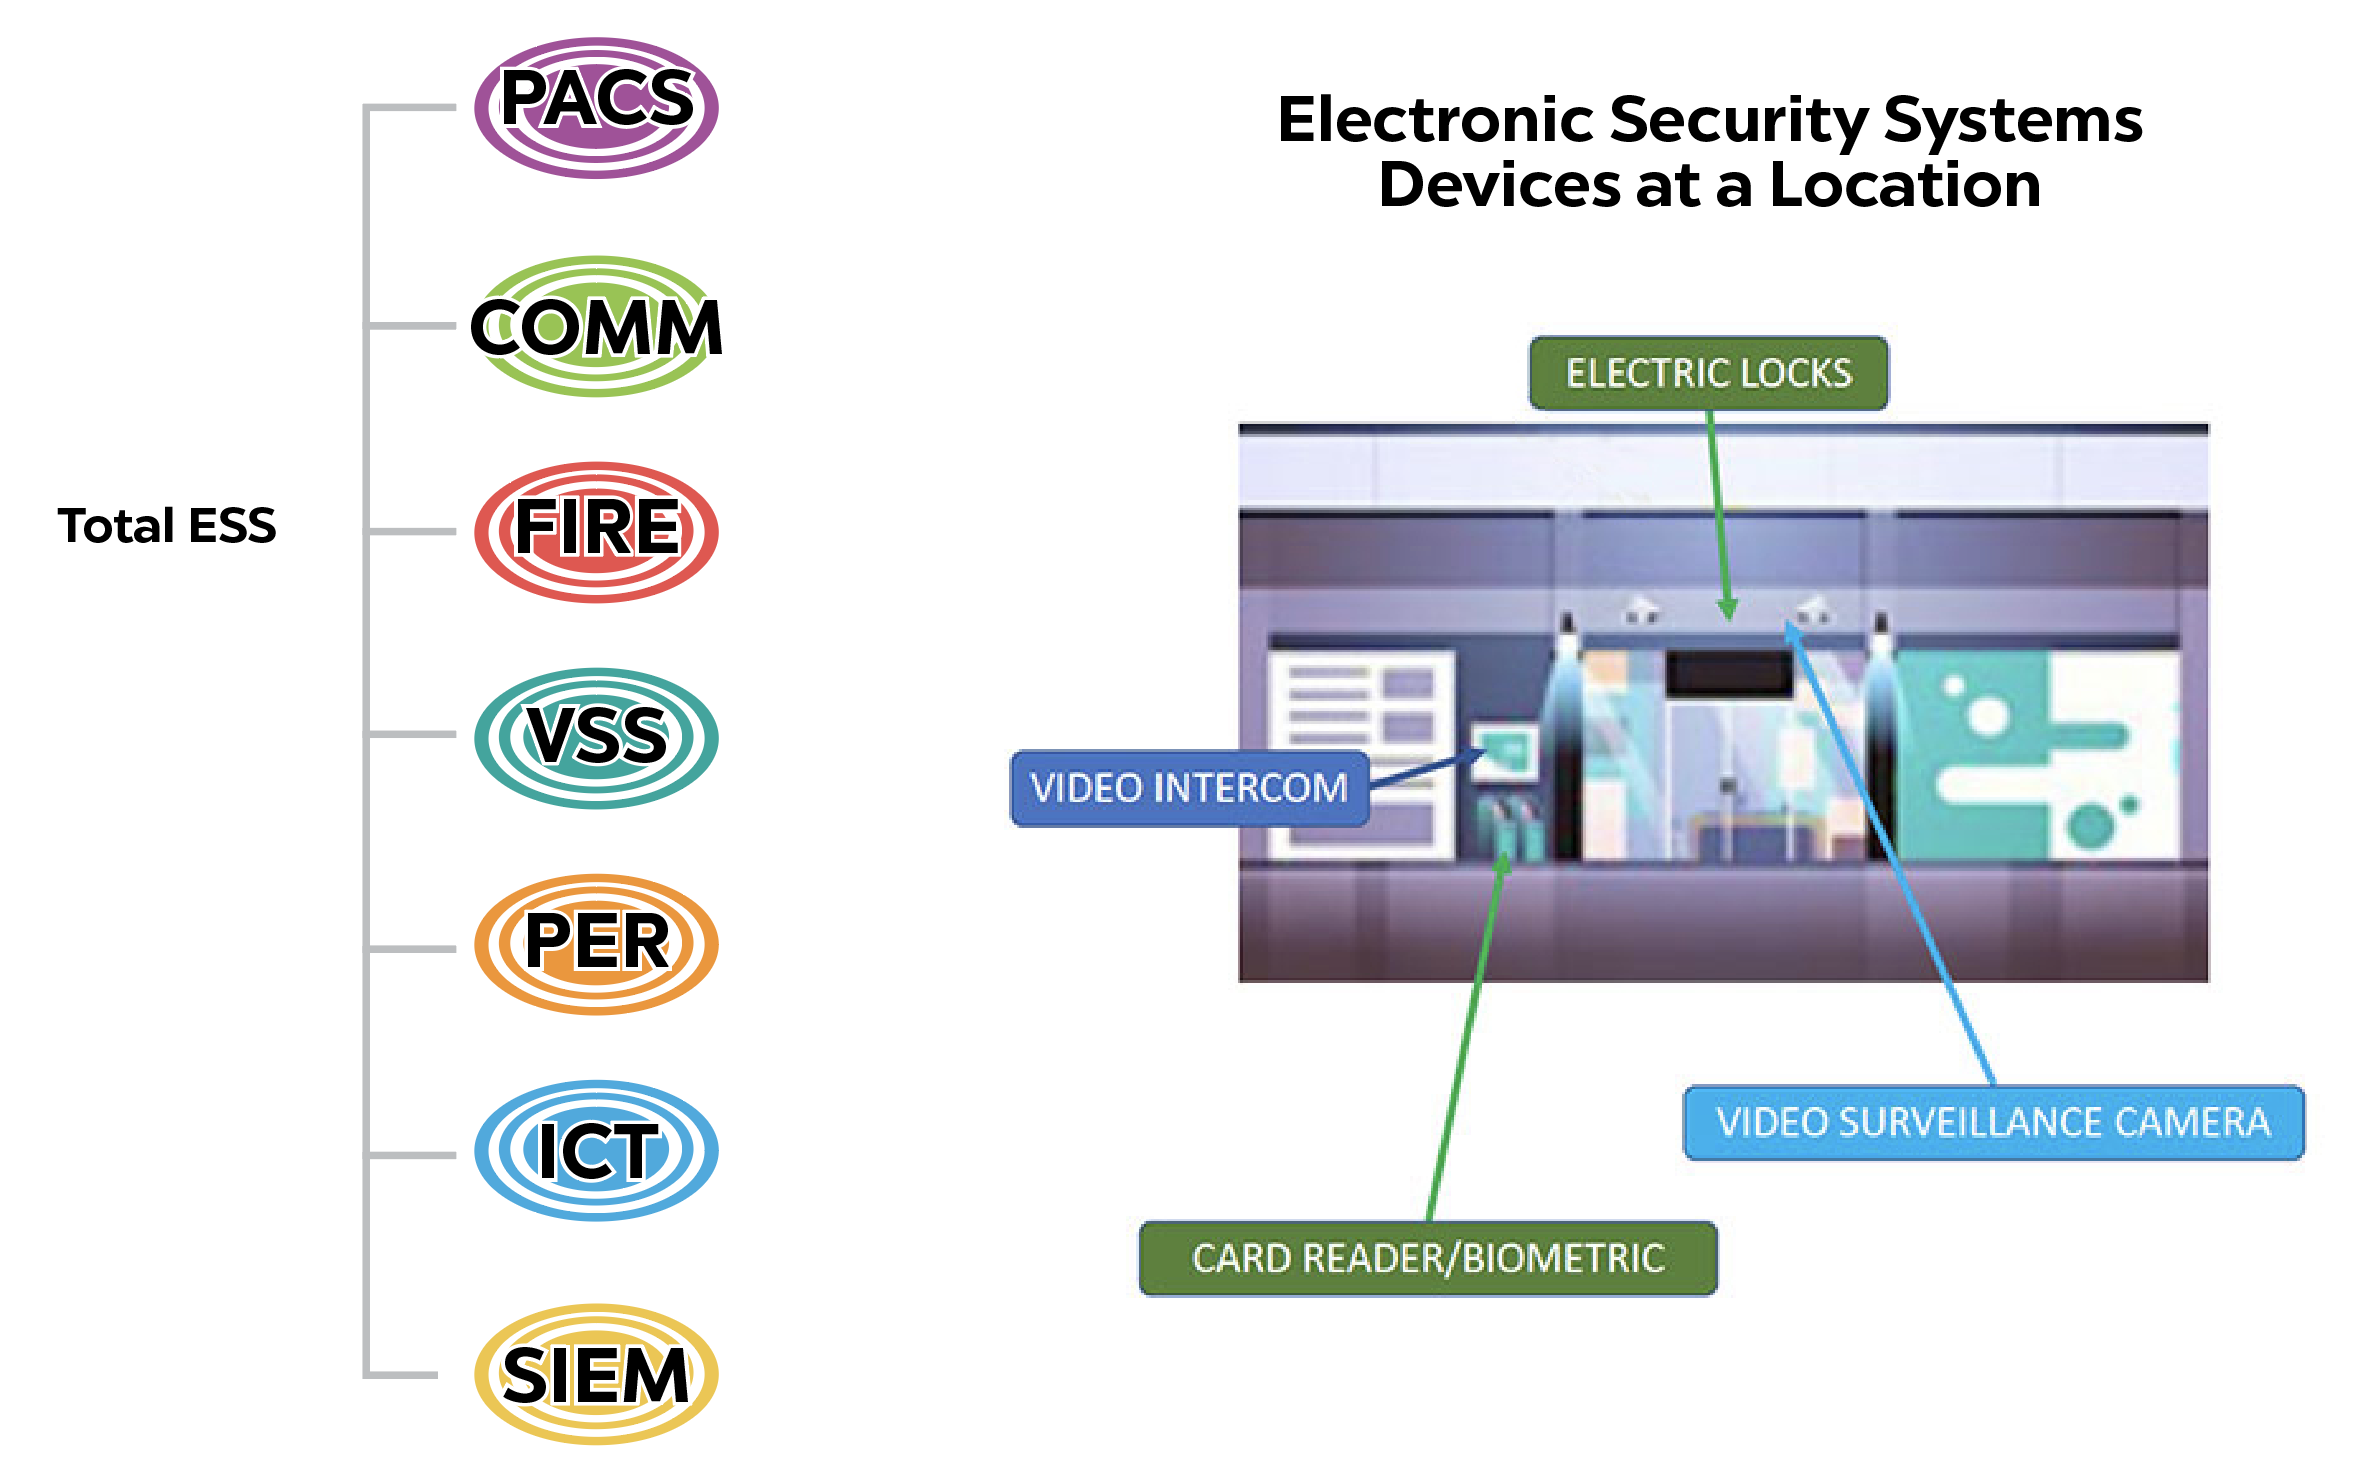 Demonstration of how ESS devices function are organized at a location, including video intercom, electric locks, video surveillance cameras and card readers/biometrics. To view the guidance with all graphs and charts, please download the full PDF.